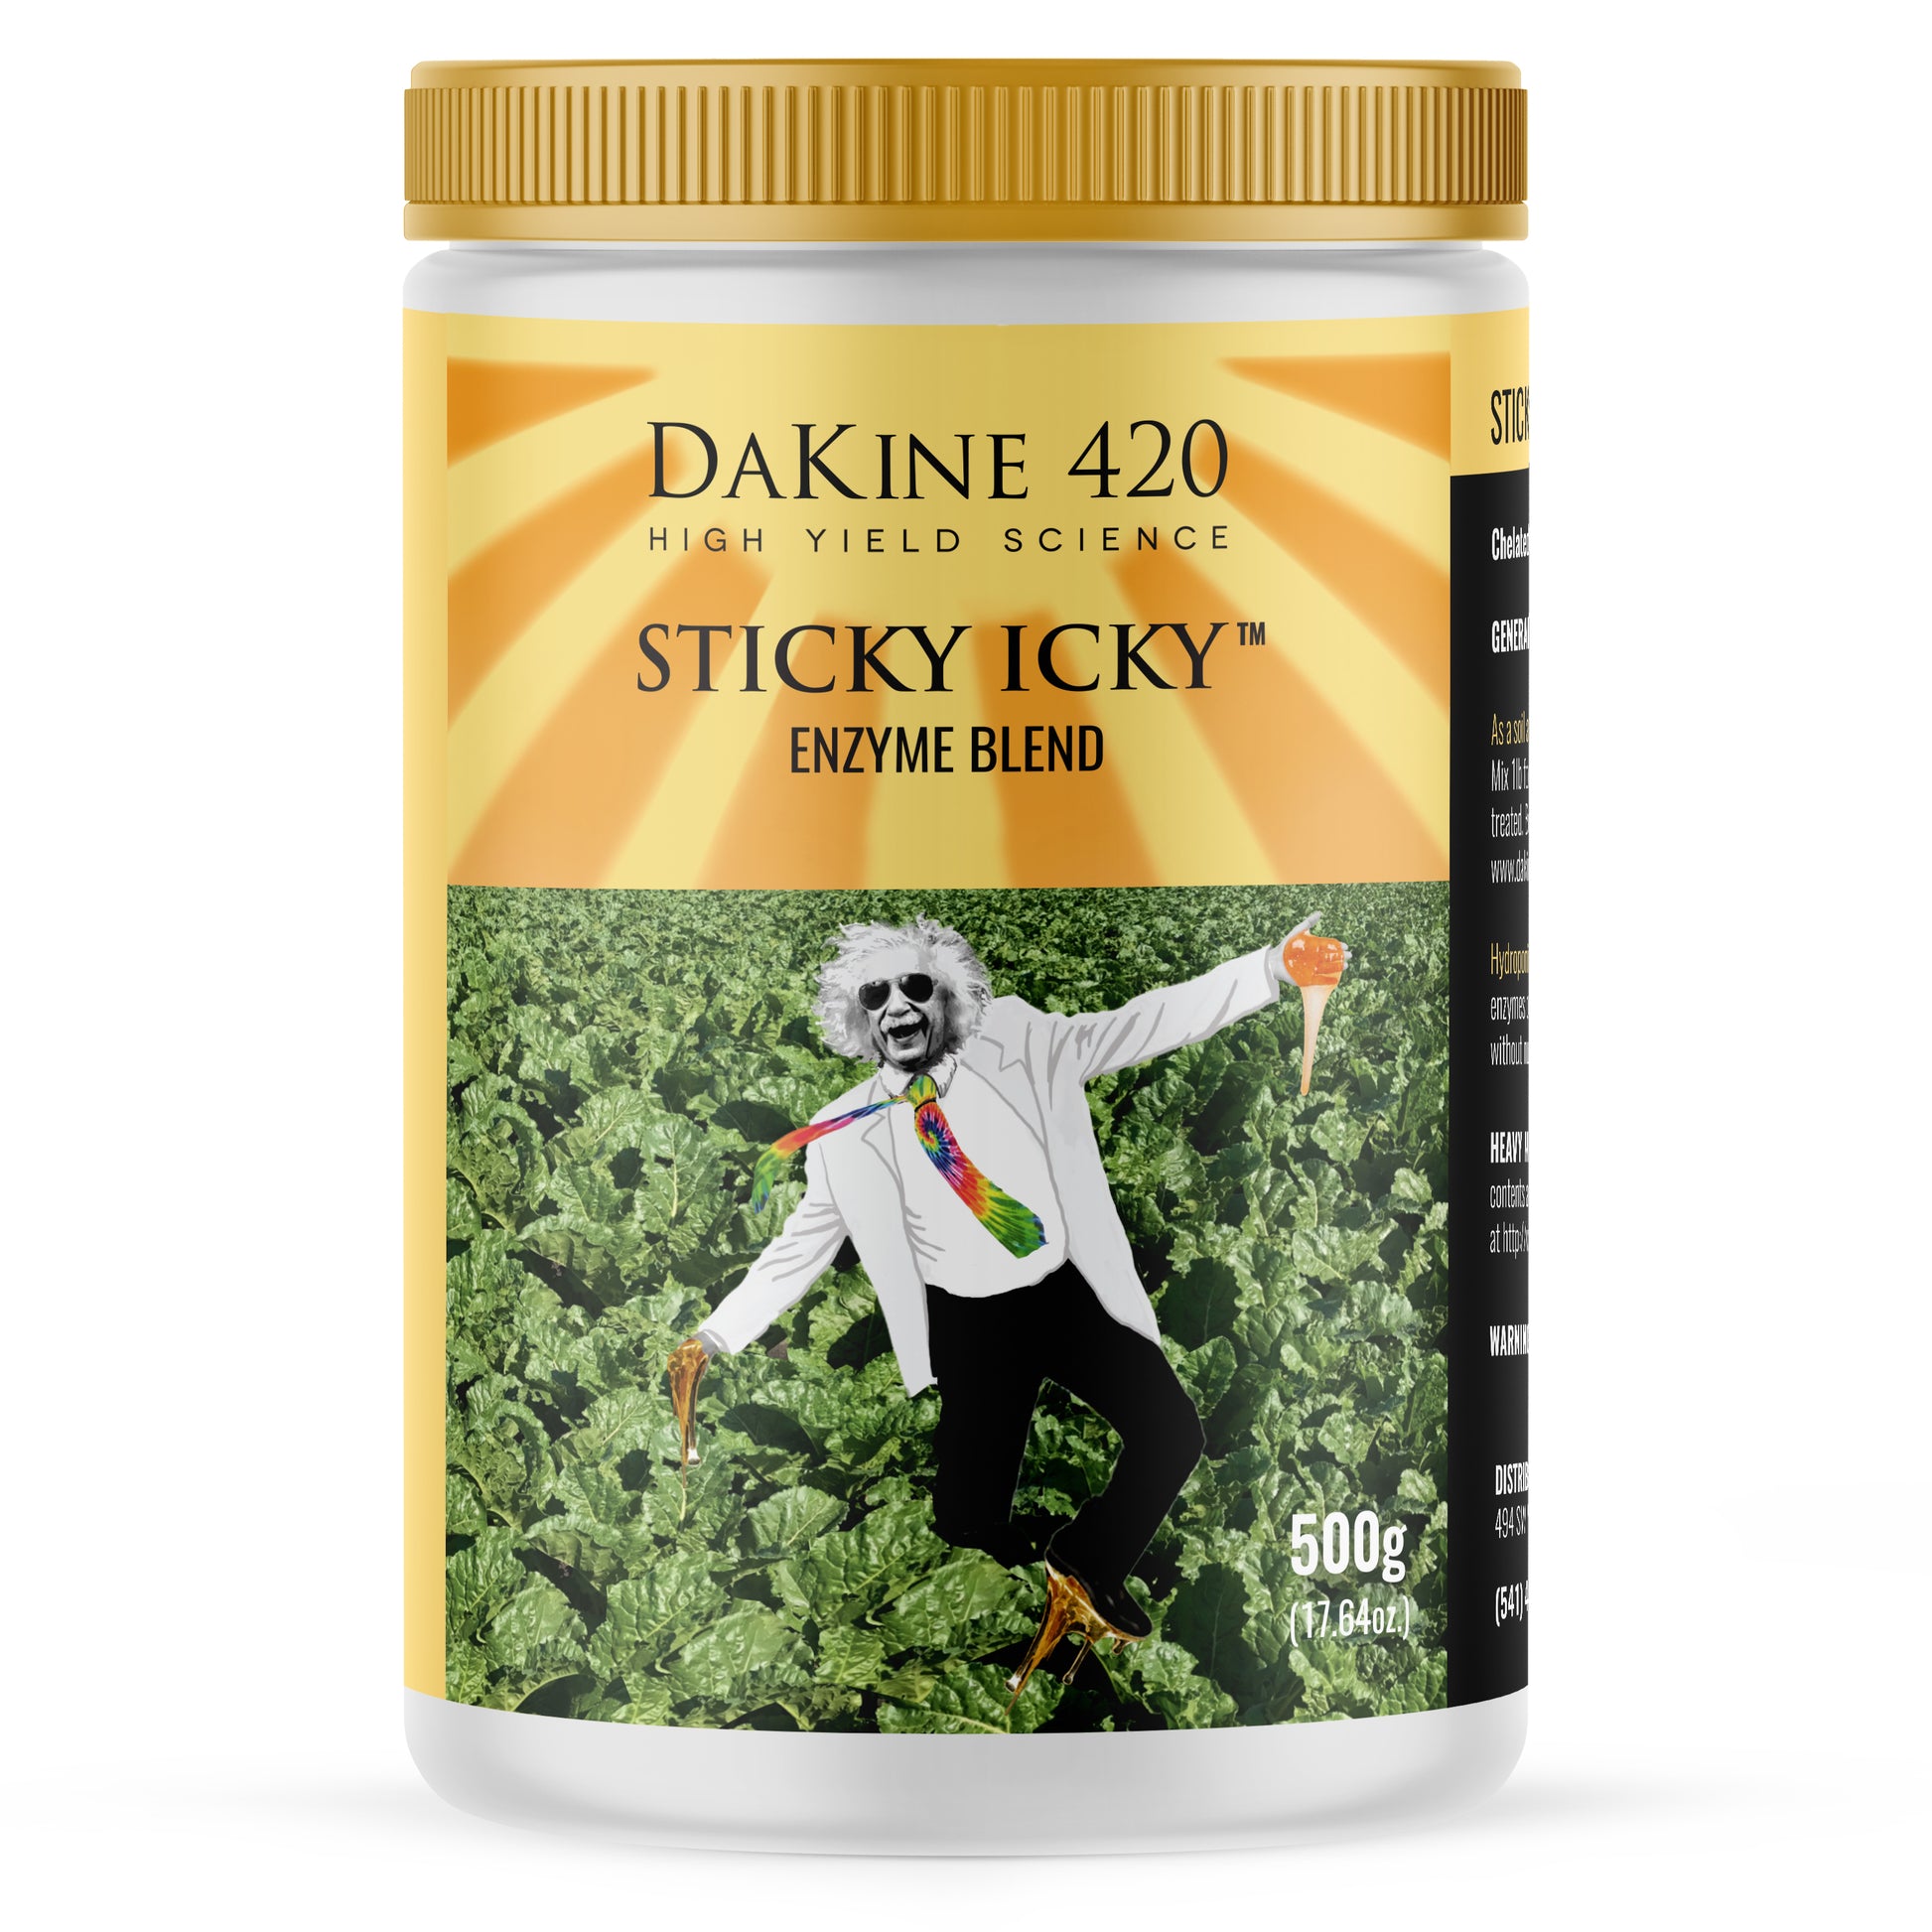 Sticky Icky supplements your soil’s naturally produced enzymes, to give you a shortcut and a boost to radical oil and resin production.—including enzymes that “stress” your plants, sending them into oil-producing hyperdrive.